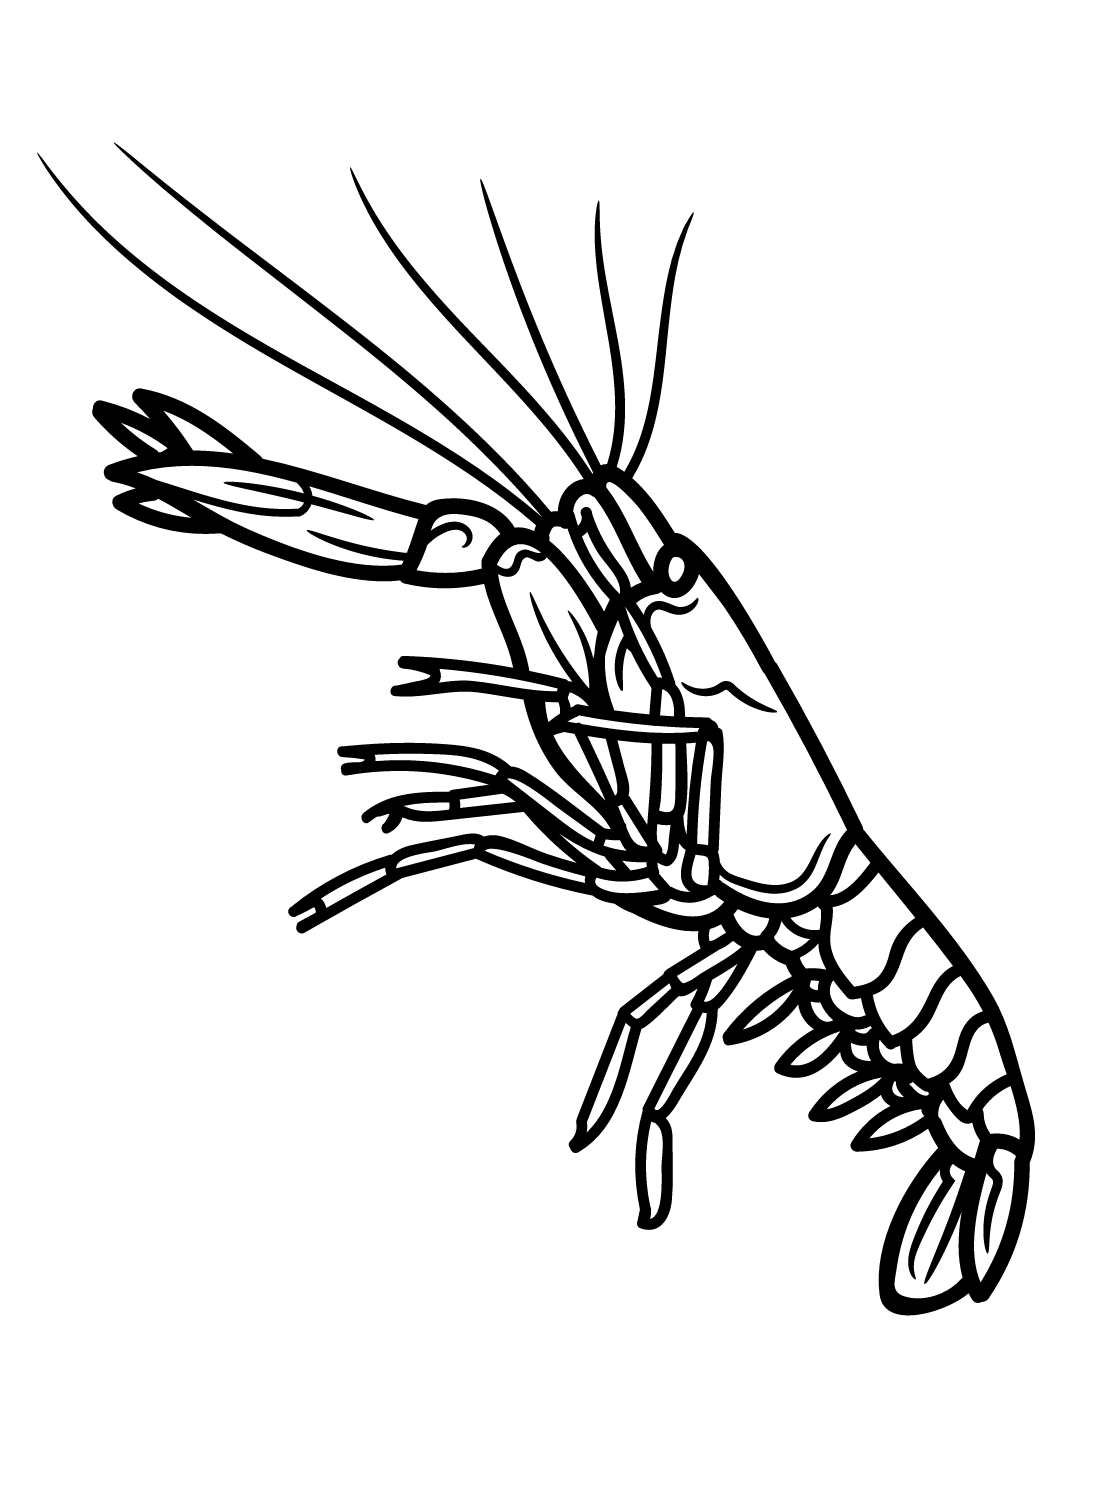 Crawfish Images Coloring Page